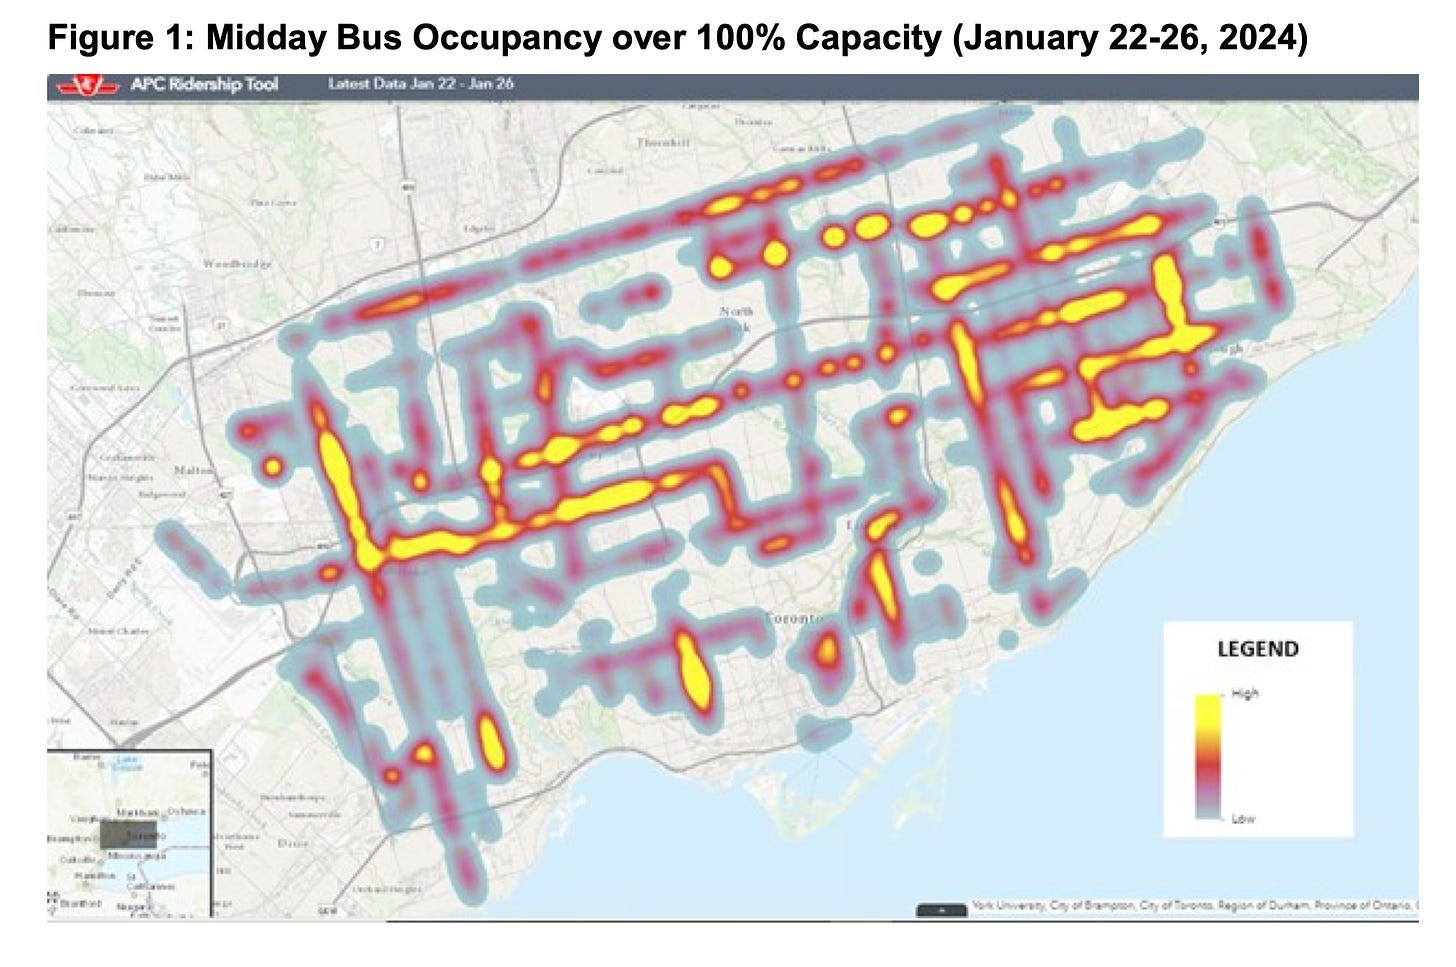 A TTC map showing bus routes that are operating above 100% capacity at midday